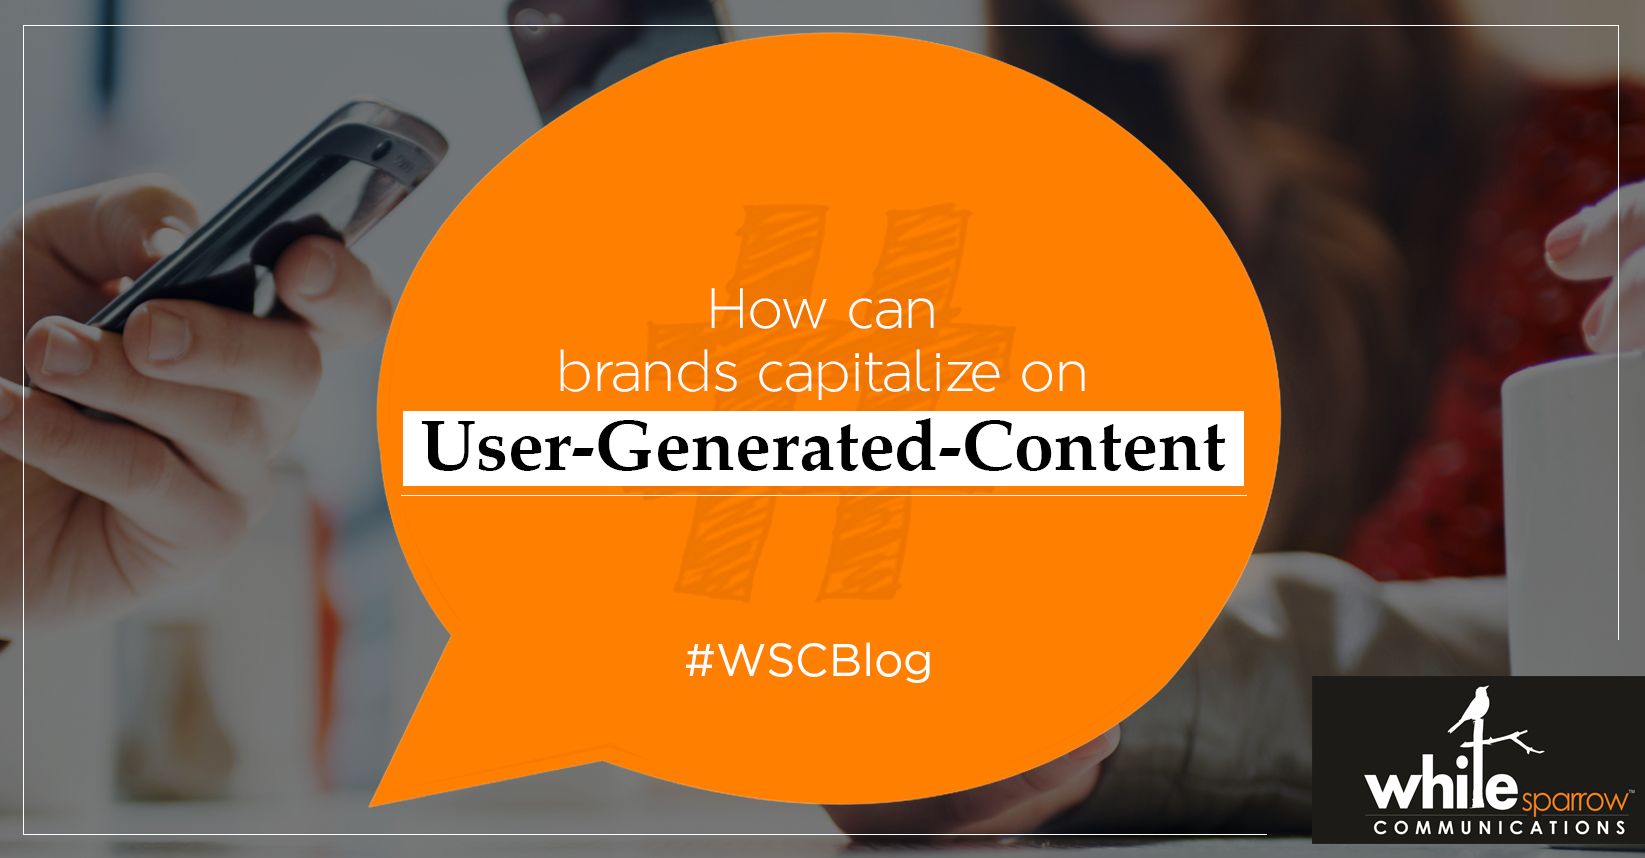 How can brands capitalize on User-Generated-Content (UGC)